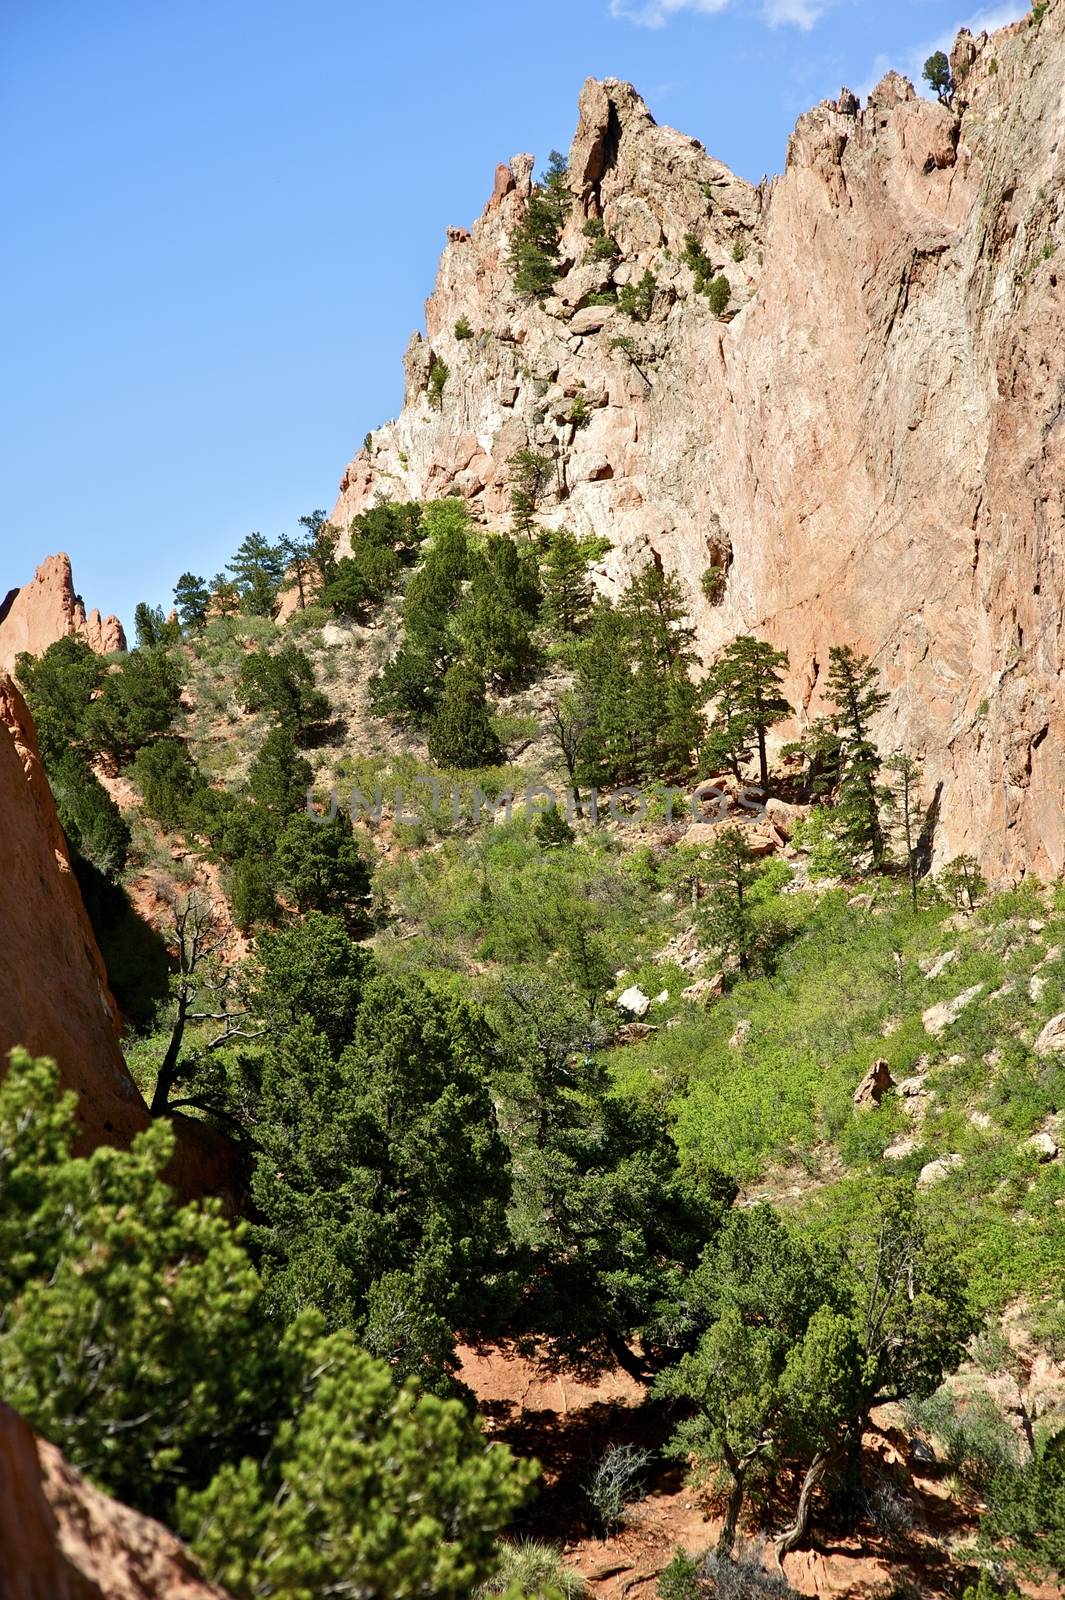 Amazing Colorado - Colorado Springs Garden of the Gods Public Park Contains Numerous Trails for Hiking, Walking, Mountain Biking and Horseback Riding. Vertical Photo.